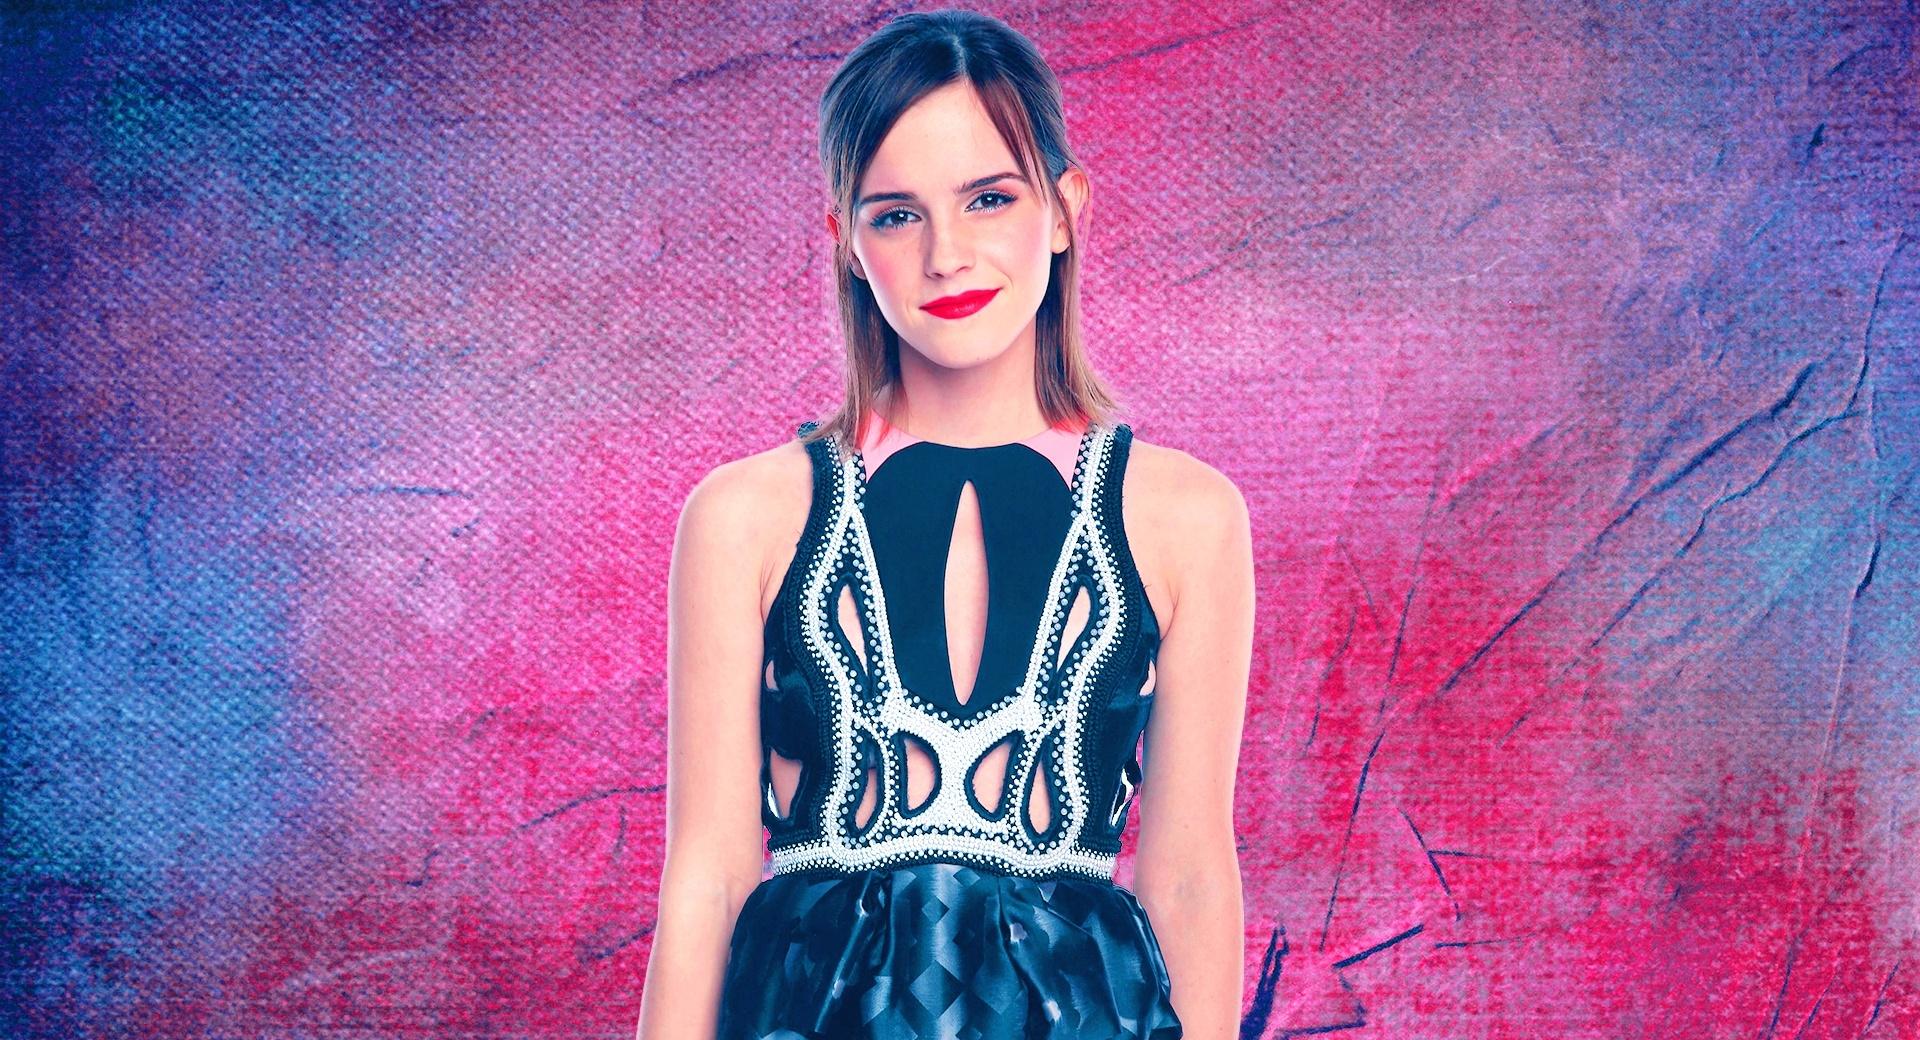 Emma Watson Peoples Choice Awards 2013 wallpapers HD quality